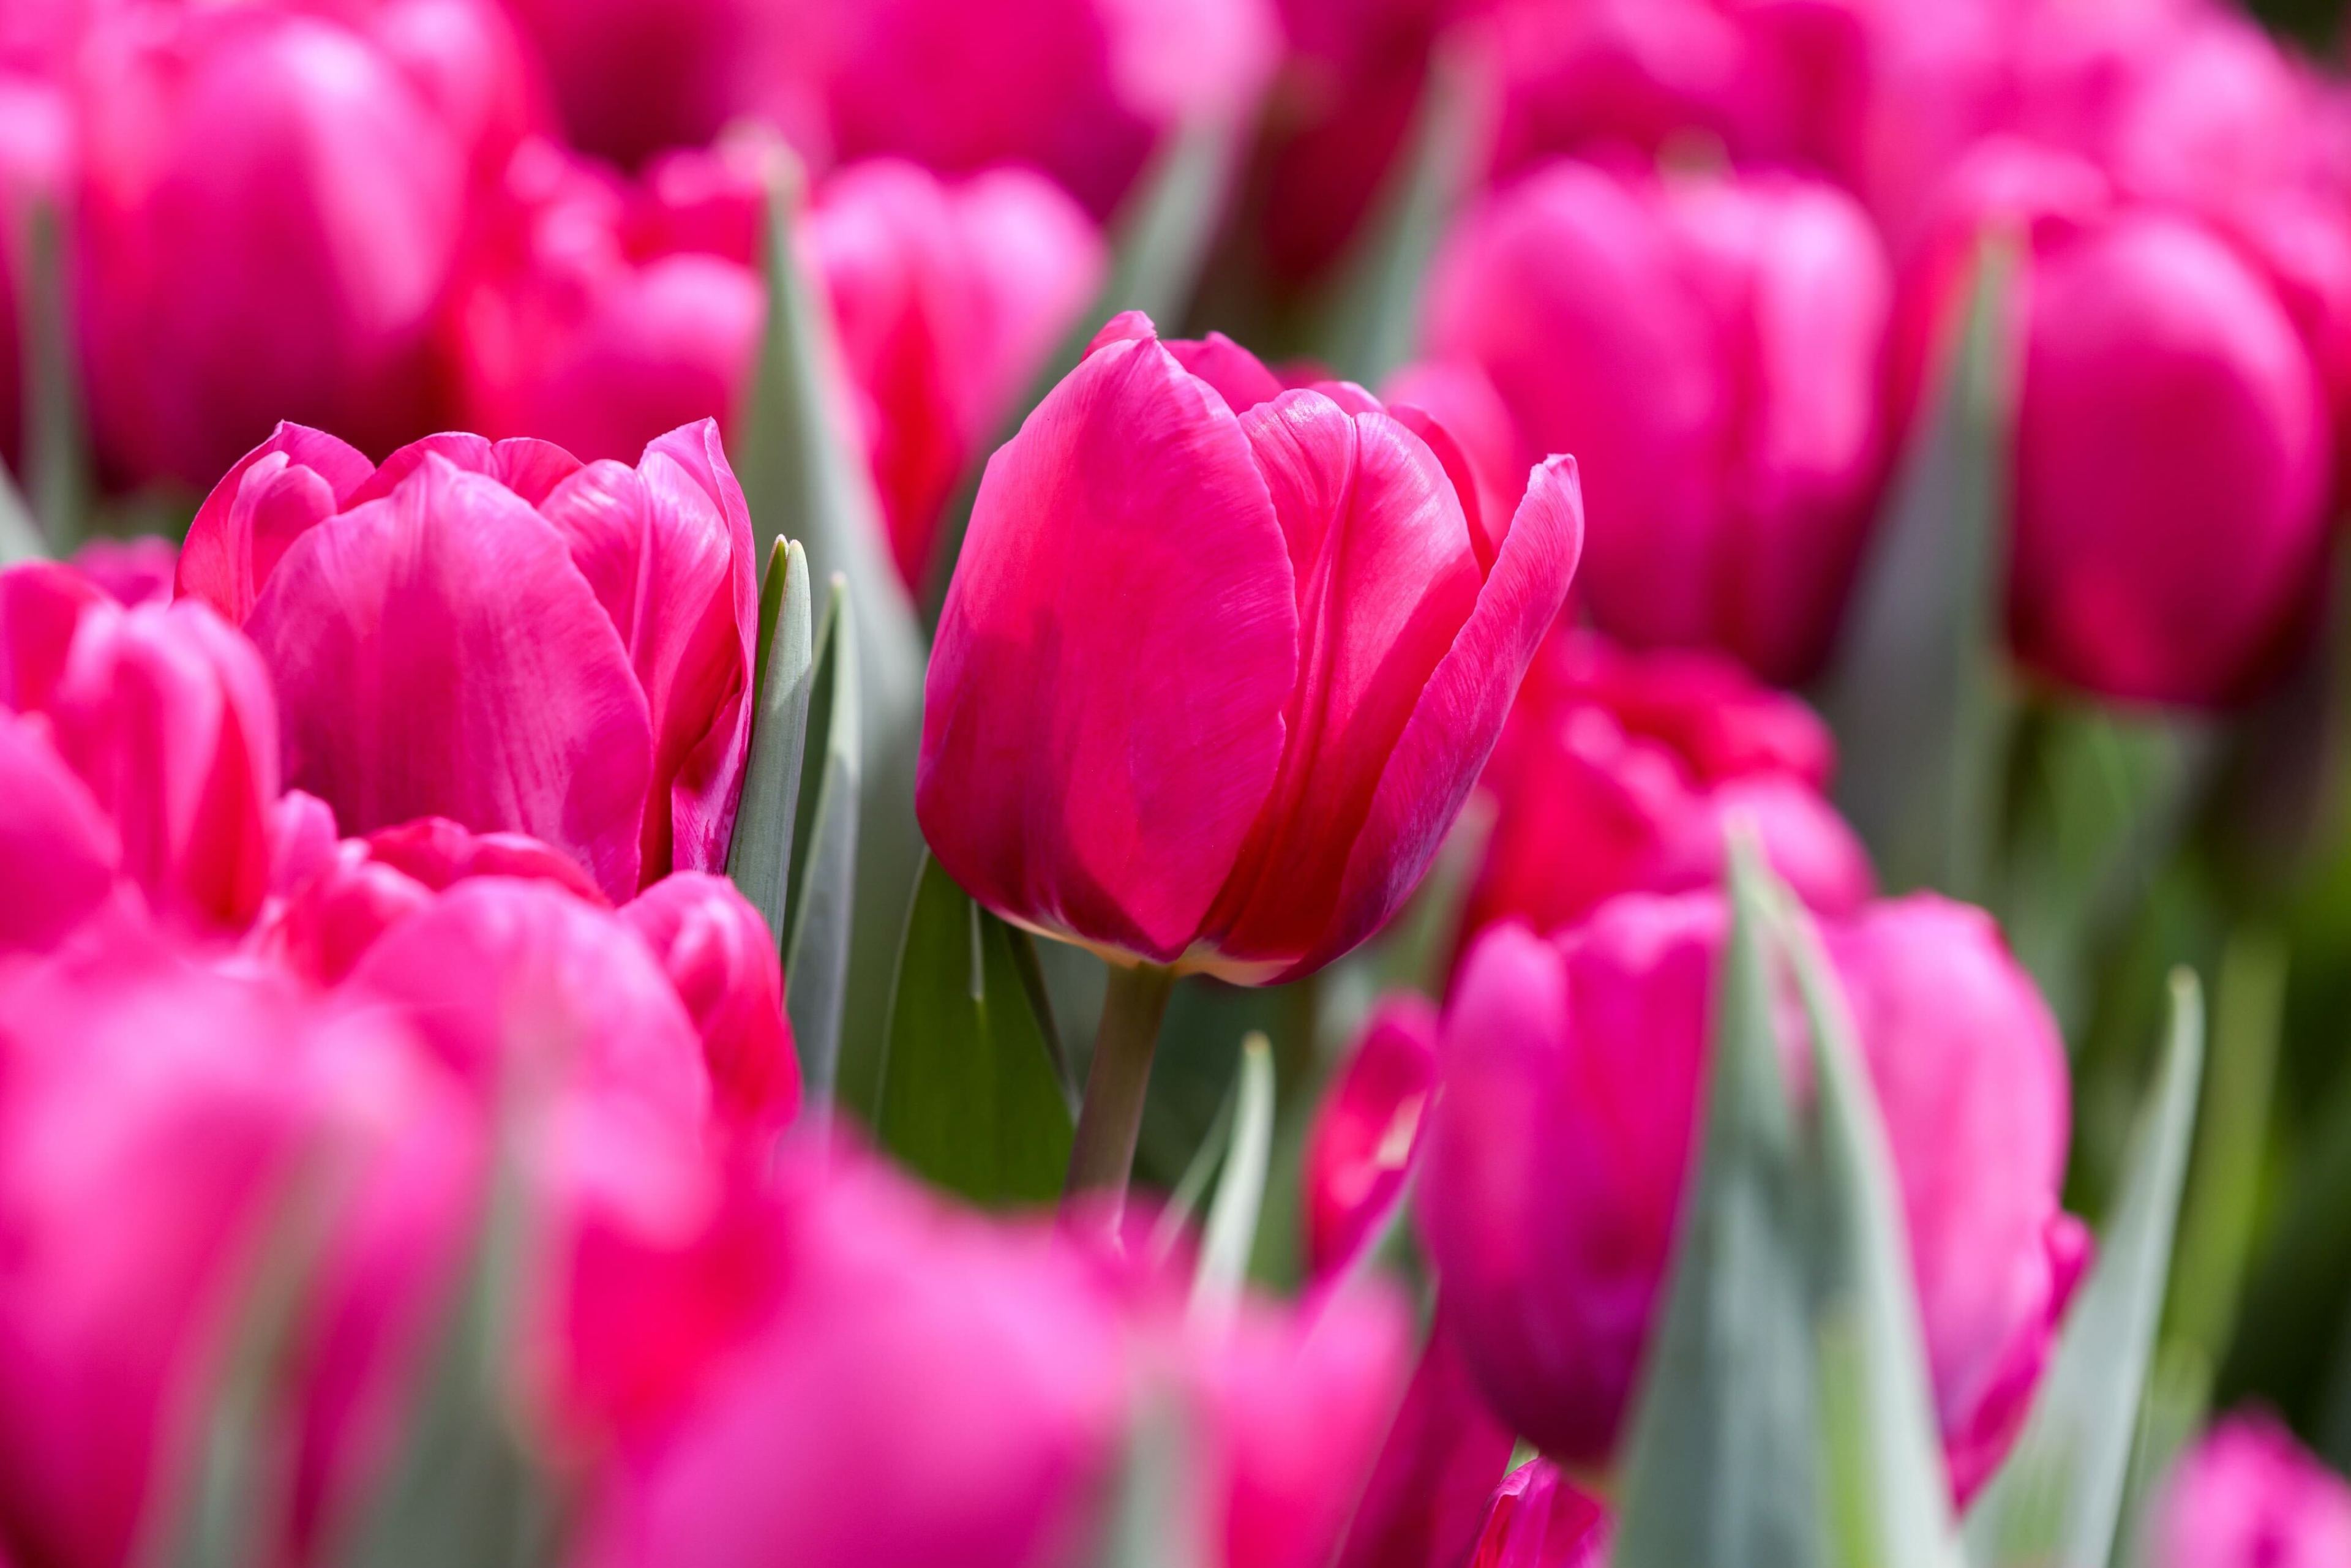 A bed of vibrant pink tulips with delicate petals and green leaves, close-up.